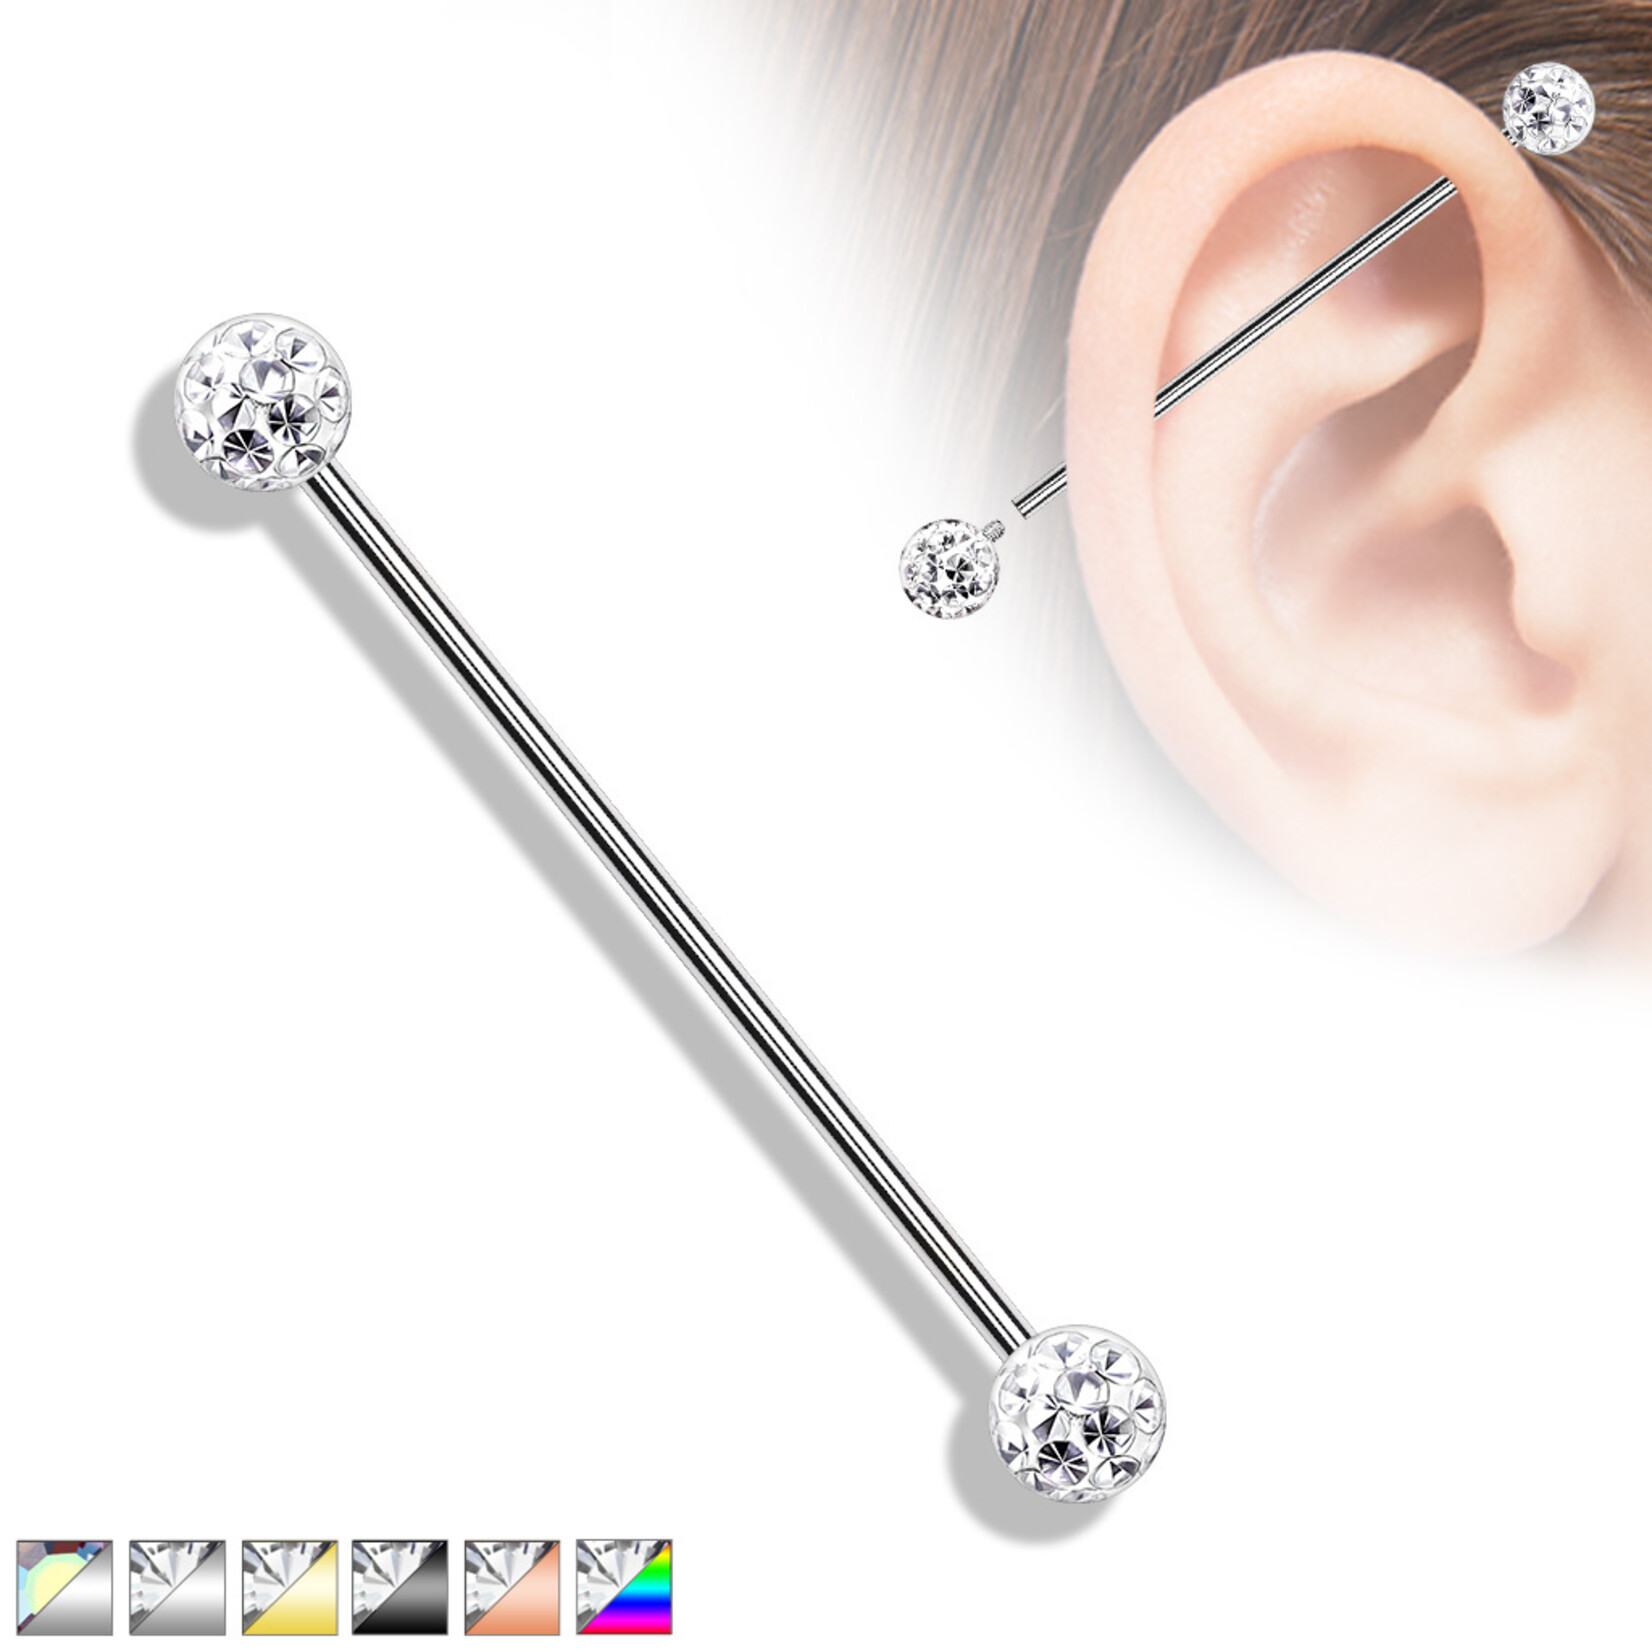 Body Jewelry Crystal ball Industrial Barbell